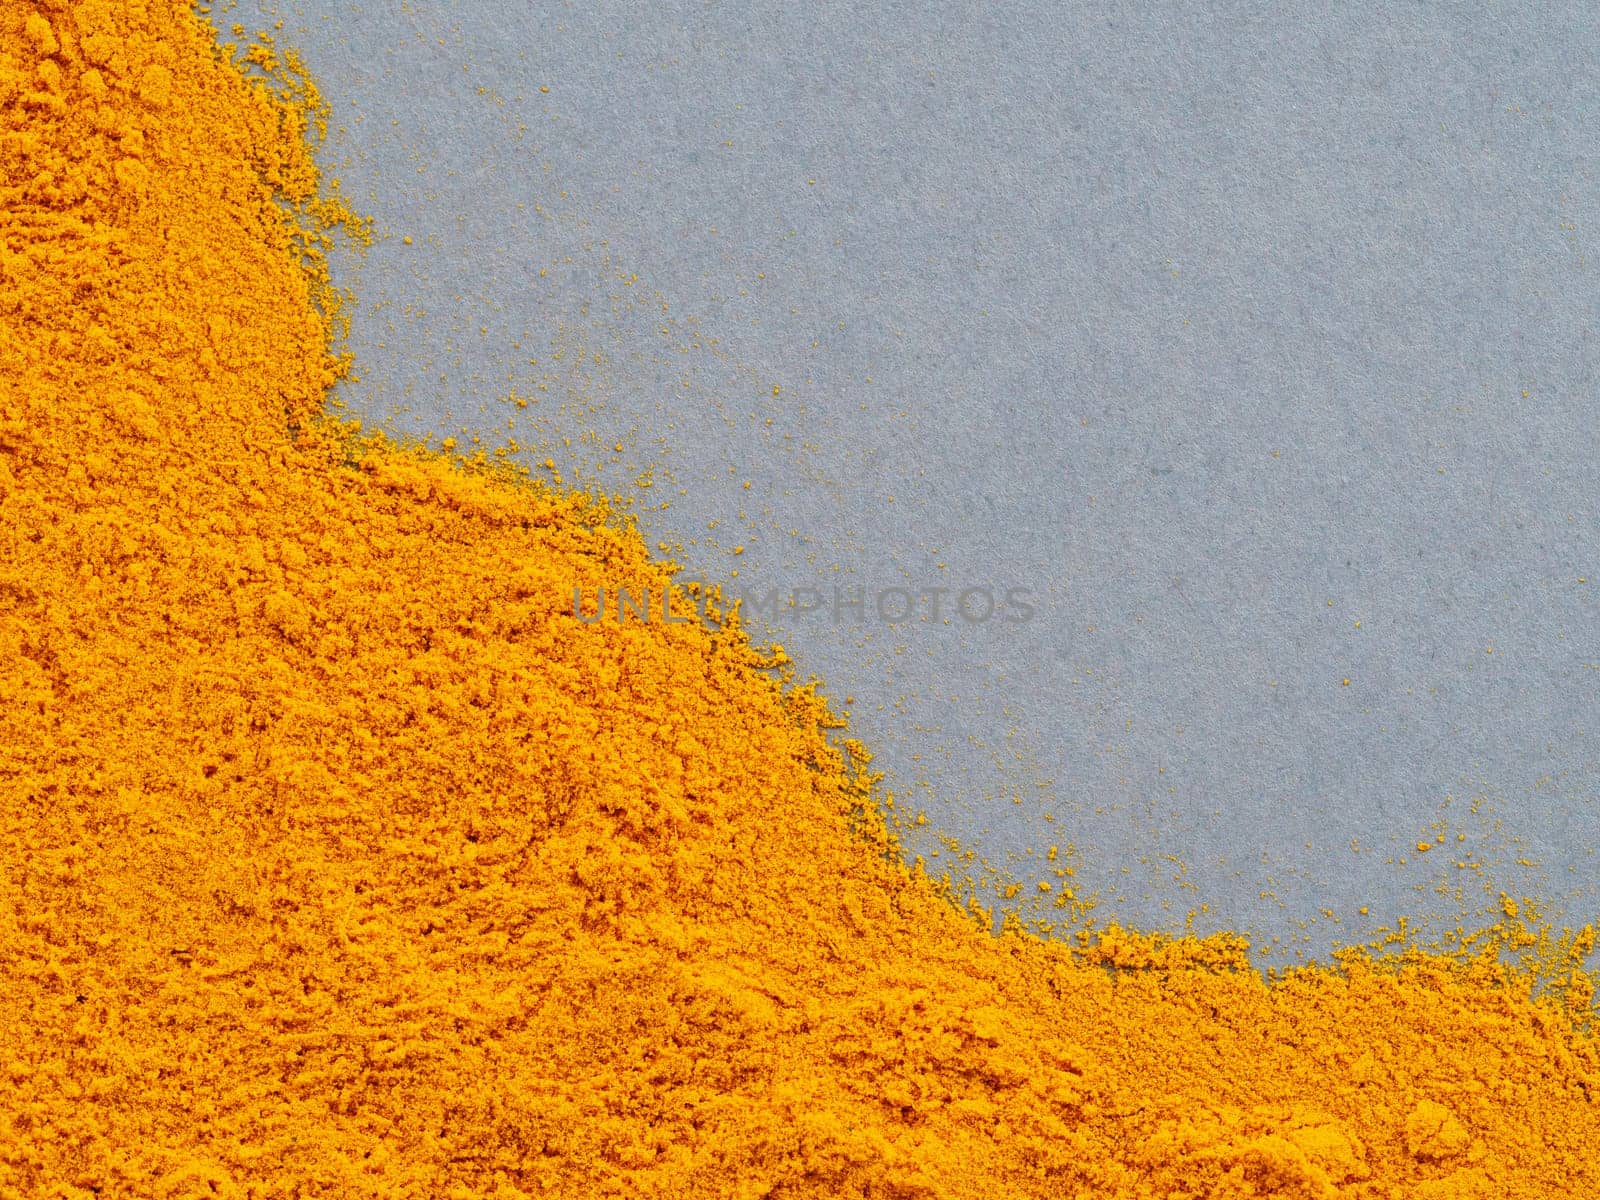 Turmeric Powder or Curcuma longa on gray background. Top view. Copy space for text.